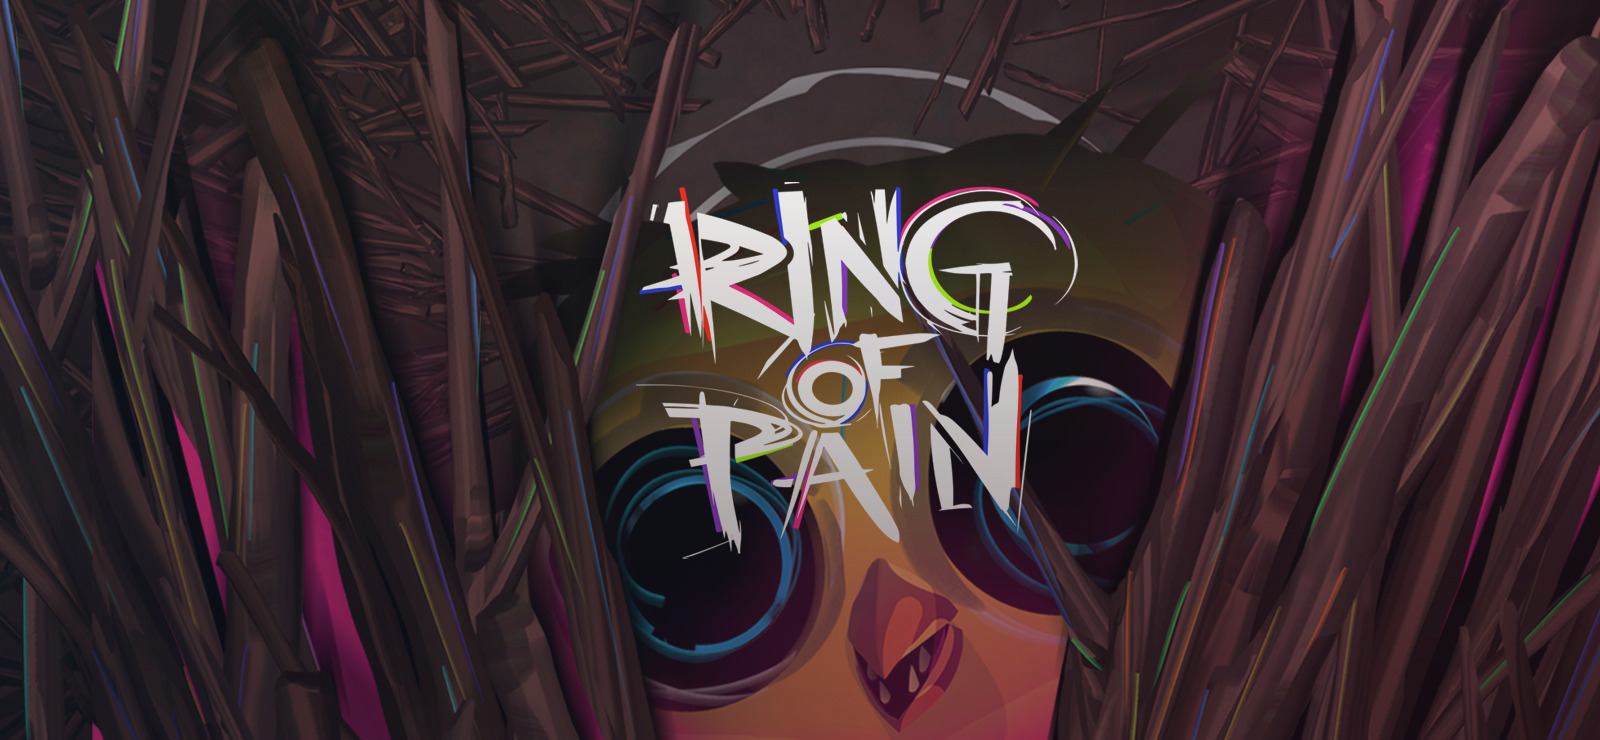 Ring of Pain is the latest FREE Epic Games Store game - Indie Game